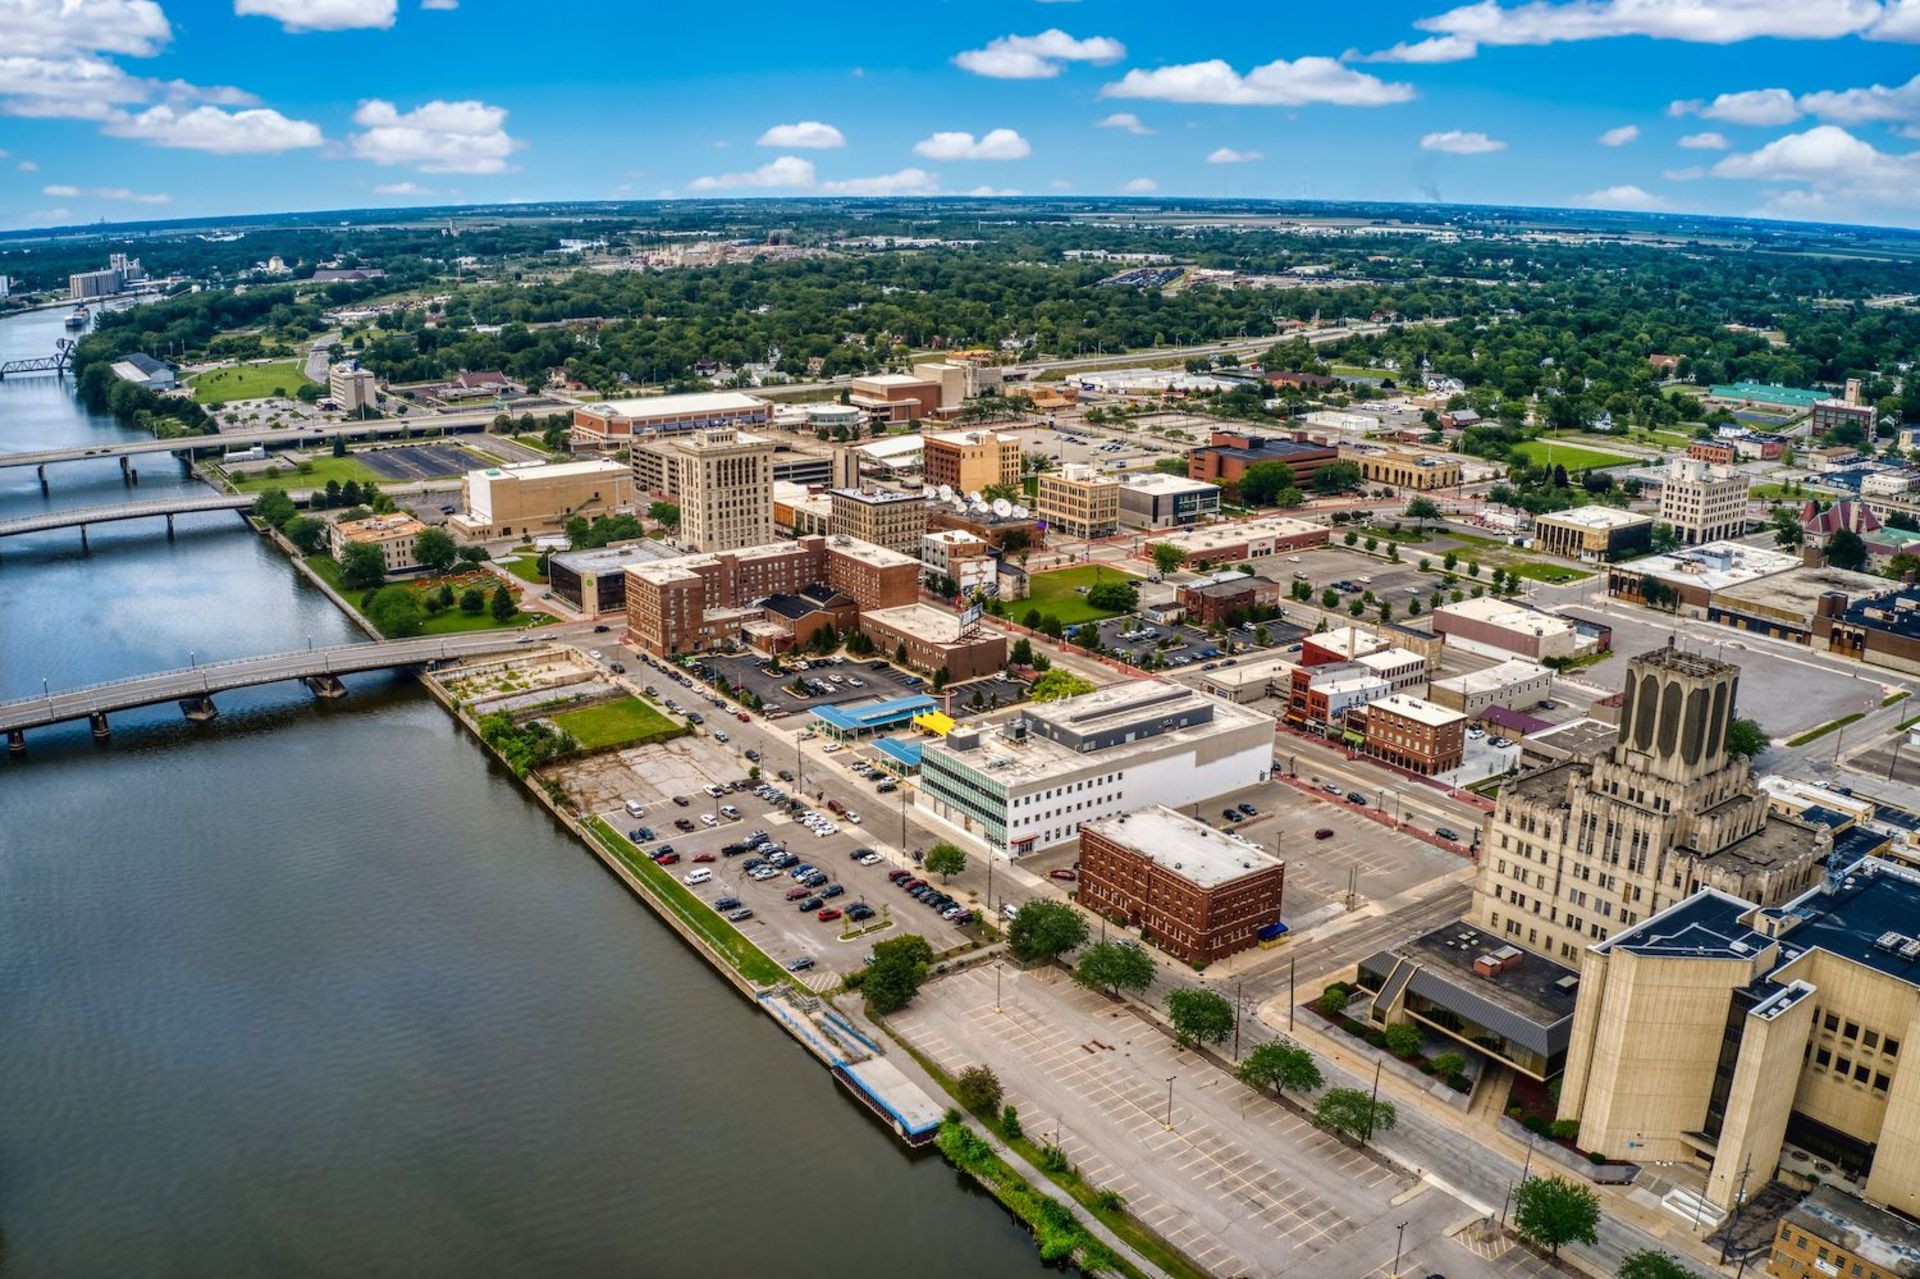 Explore the Vibrant Lifestyle of this Michigan Town, Where Affordability Meets Friendliness! - Image 15 of 15